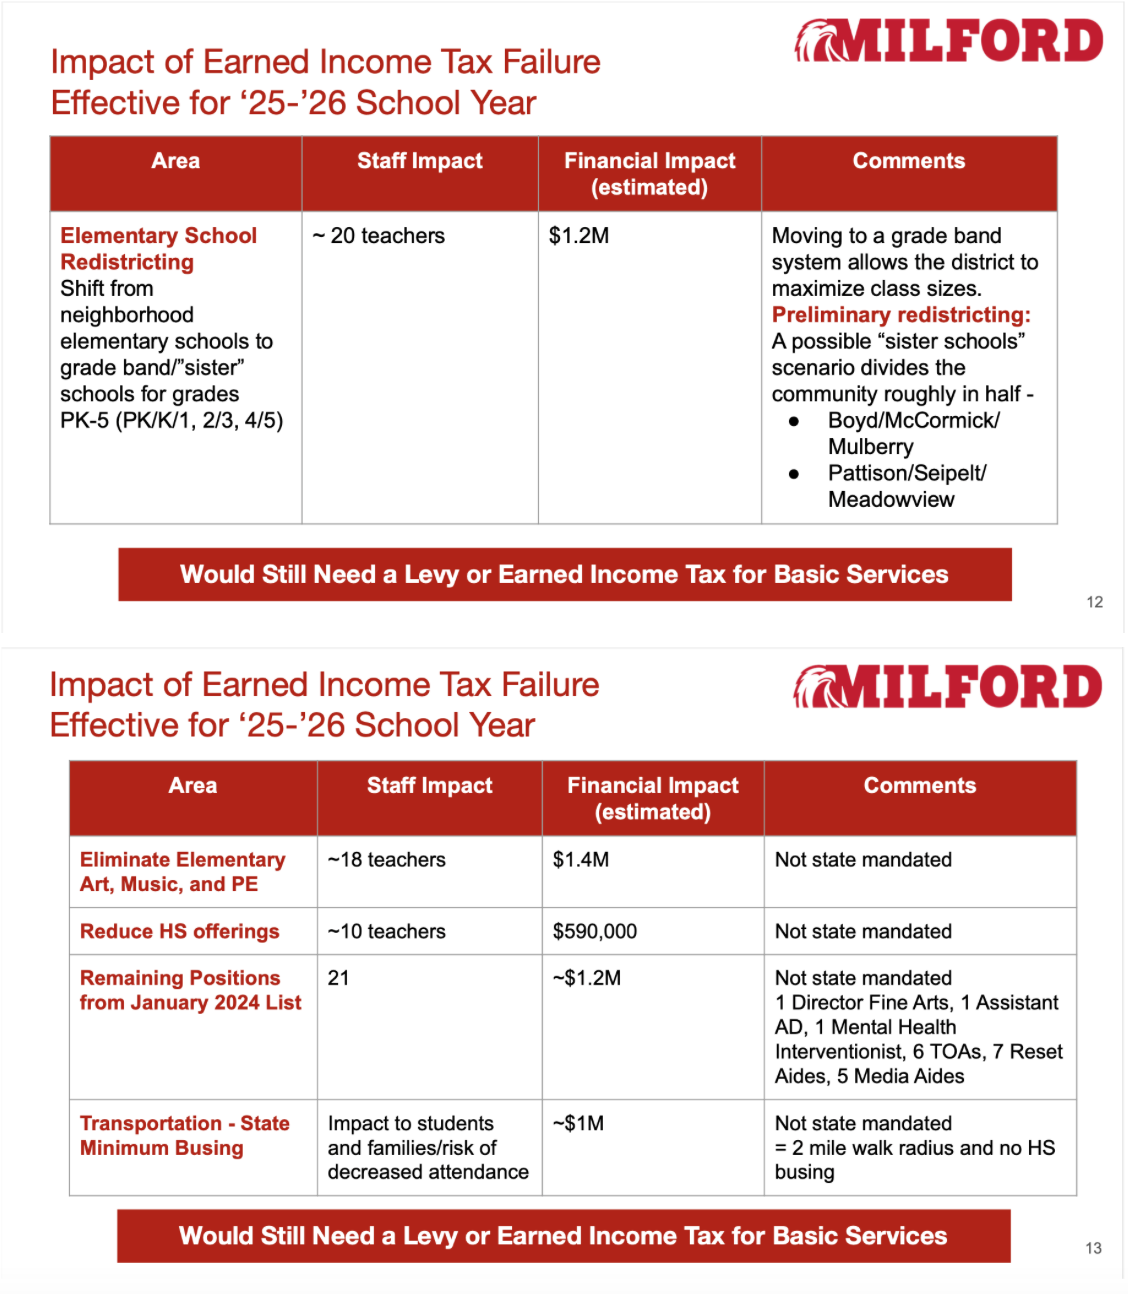 Impact of an Earned Income Tax failure for the 2025-2026 school year